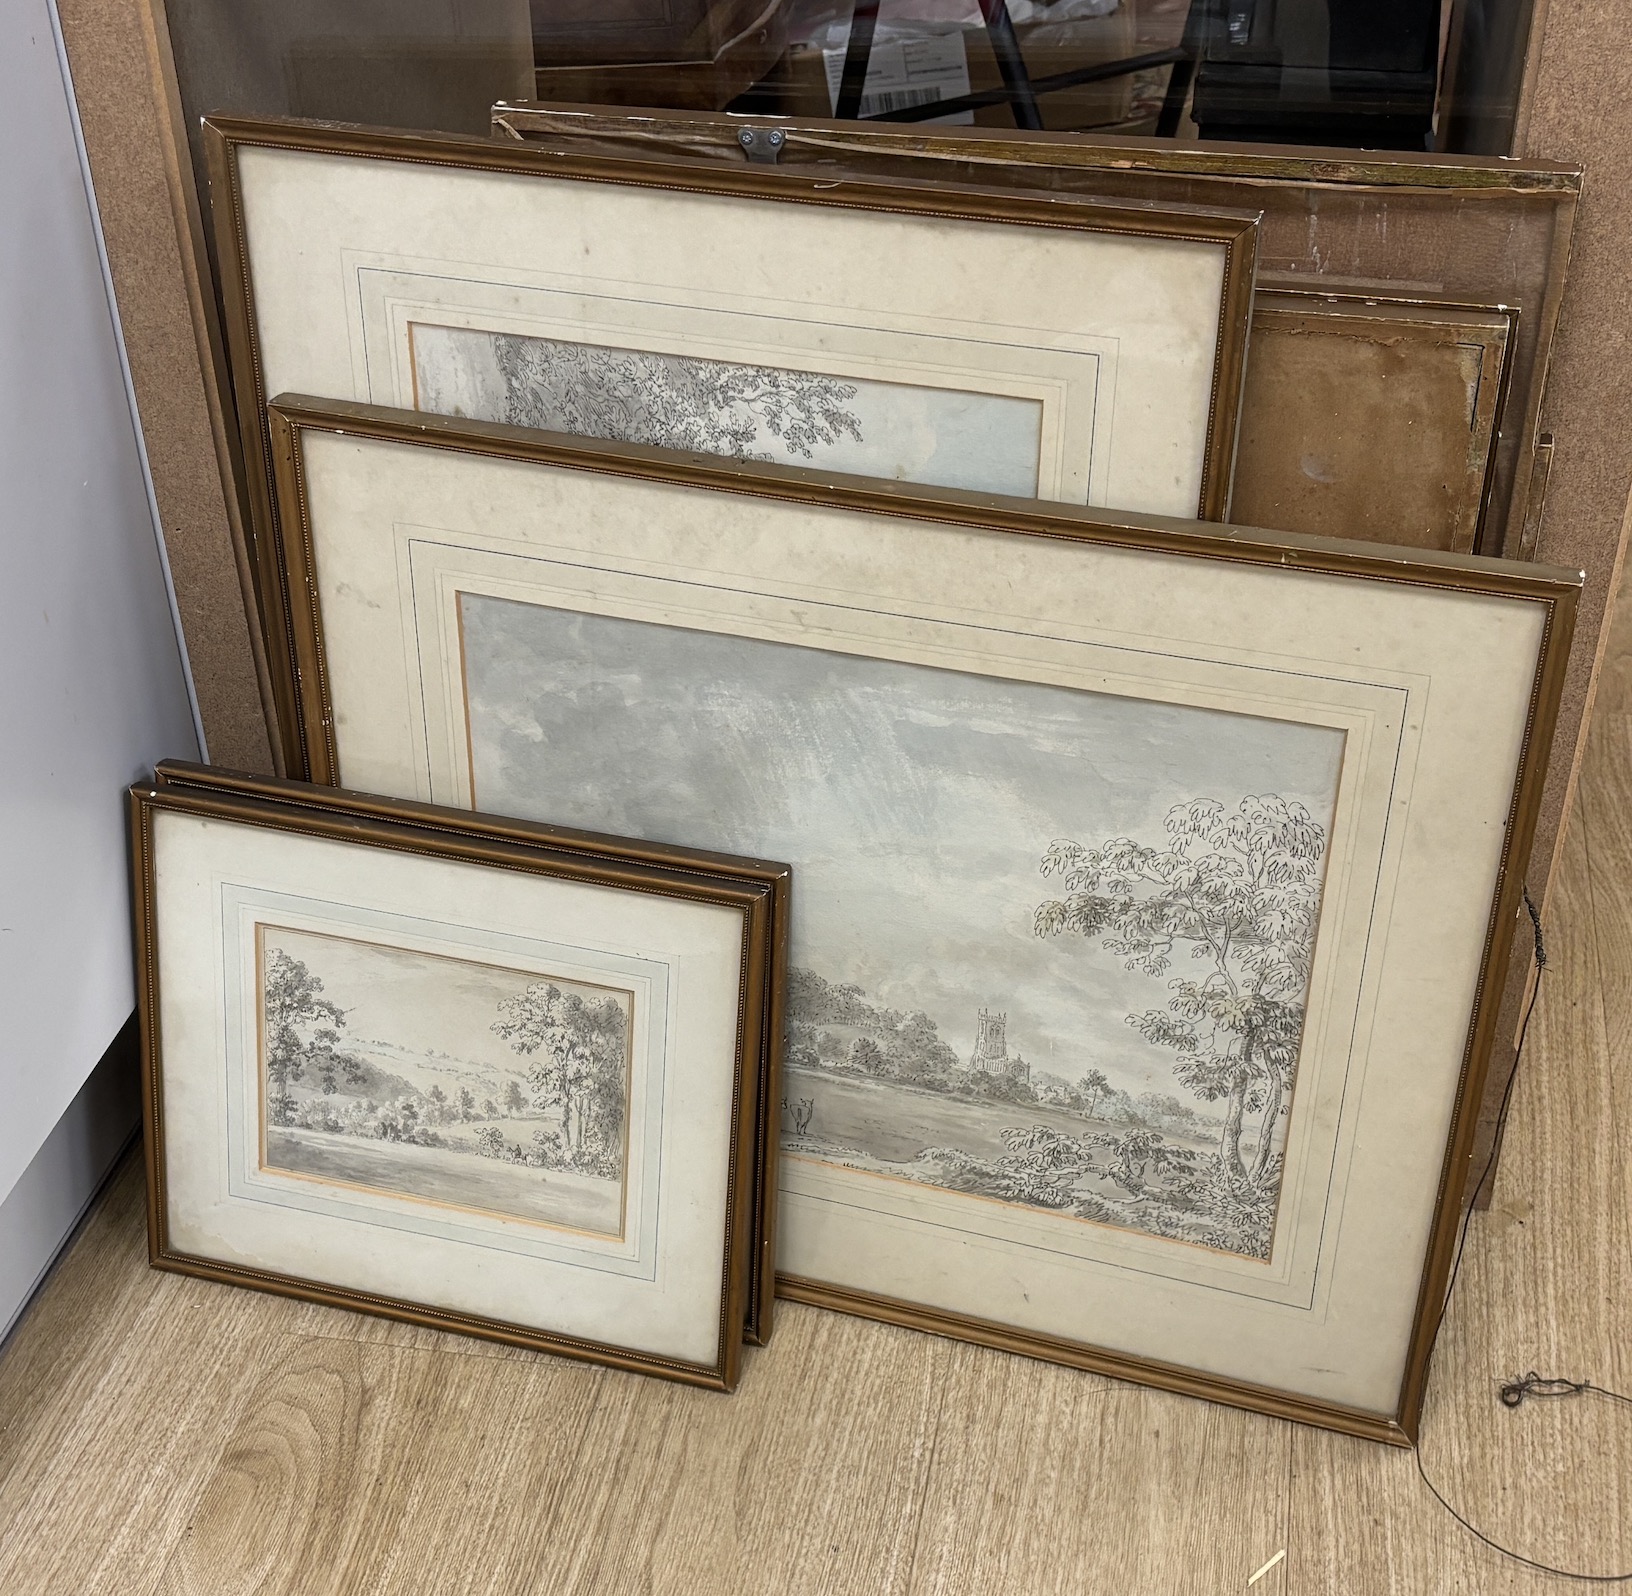 Early 19th century English School, set of eight pencil and watercolour drawings, Rustic landscapes, 30 x 43cm